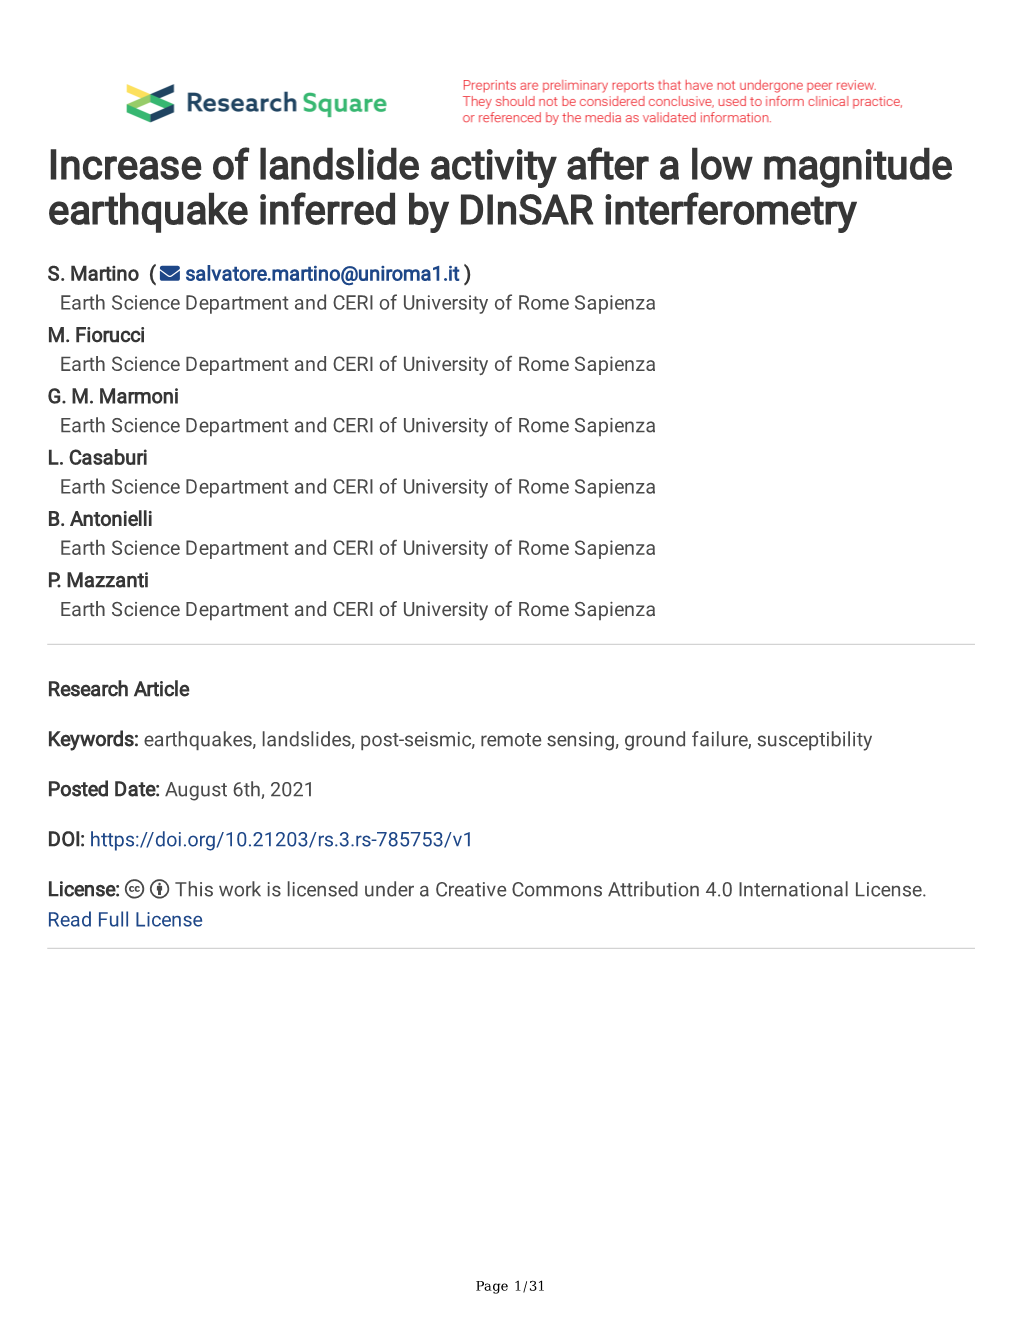 Increase of Landslide Activity After a Low Magnitude Earthquake Inferred by Dinsar Interferometry